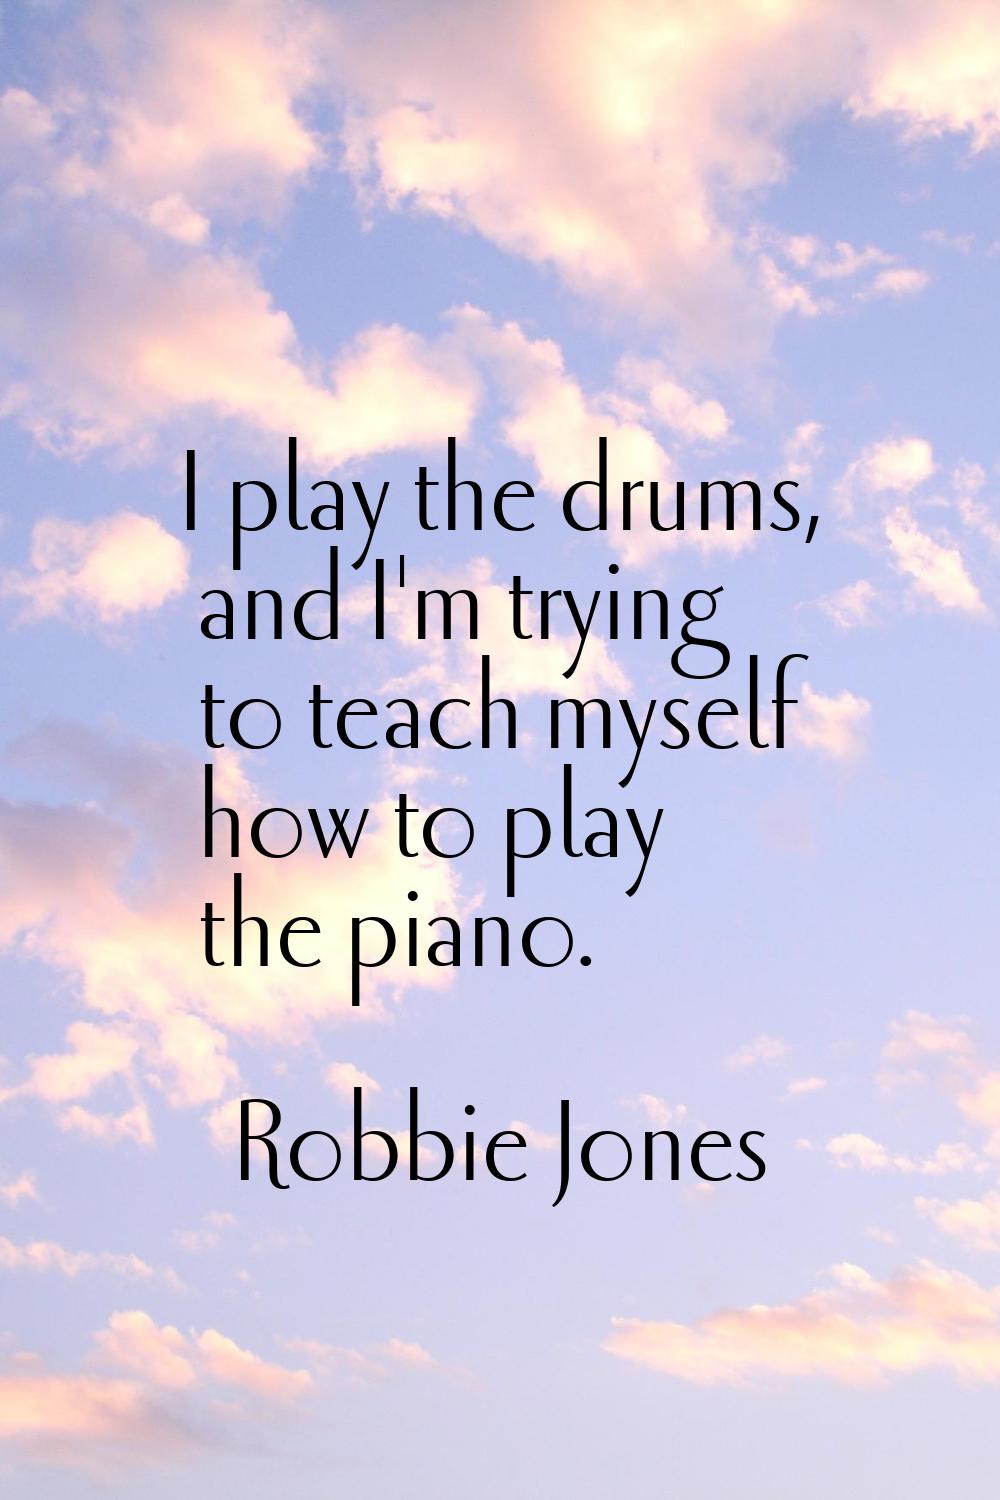 I play the drums, and I'm trying to teach myself how to play the piano.